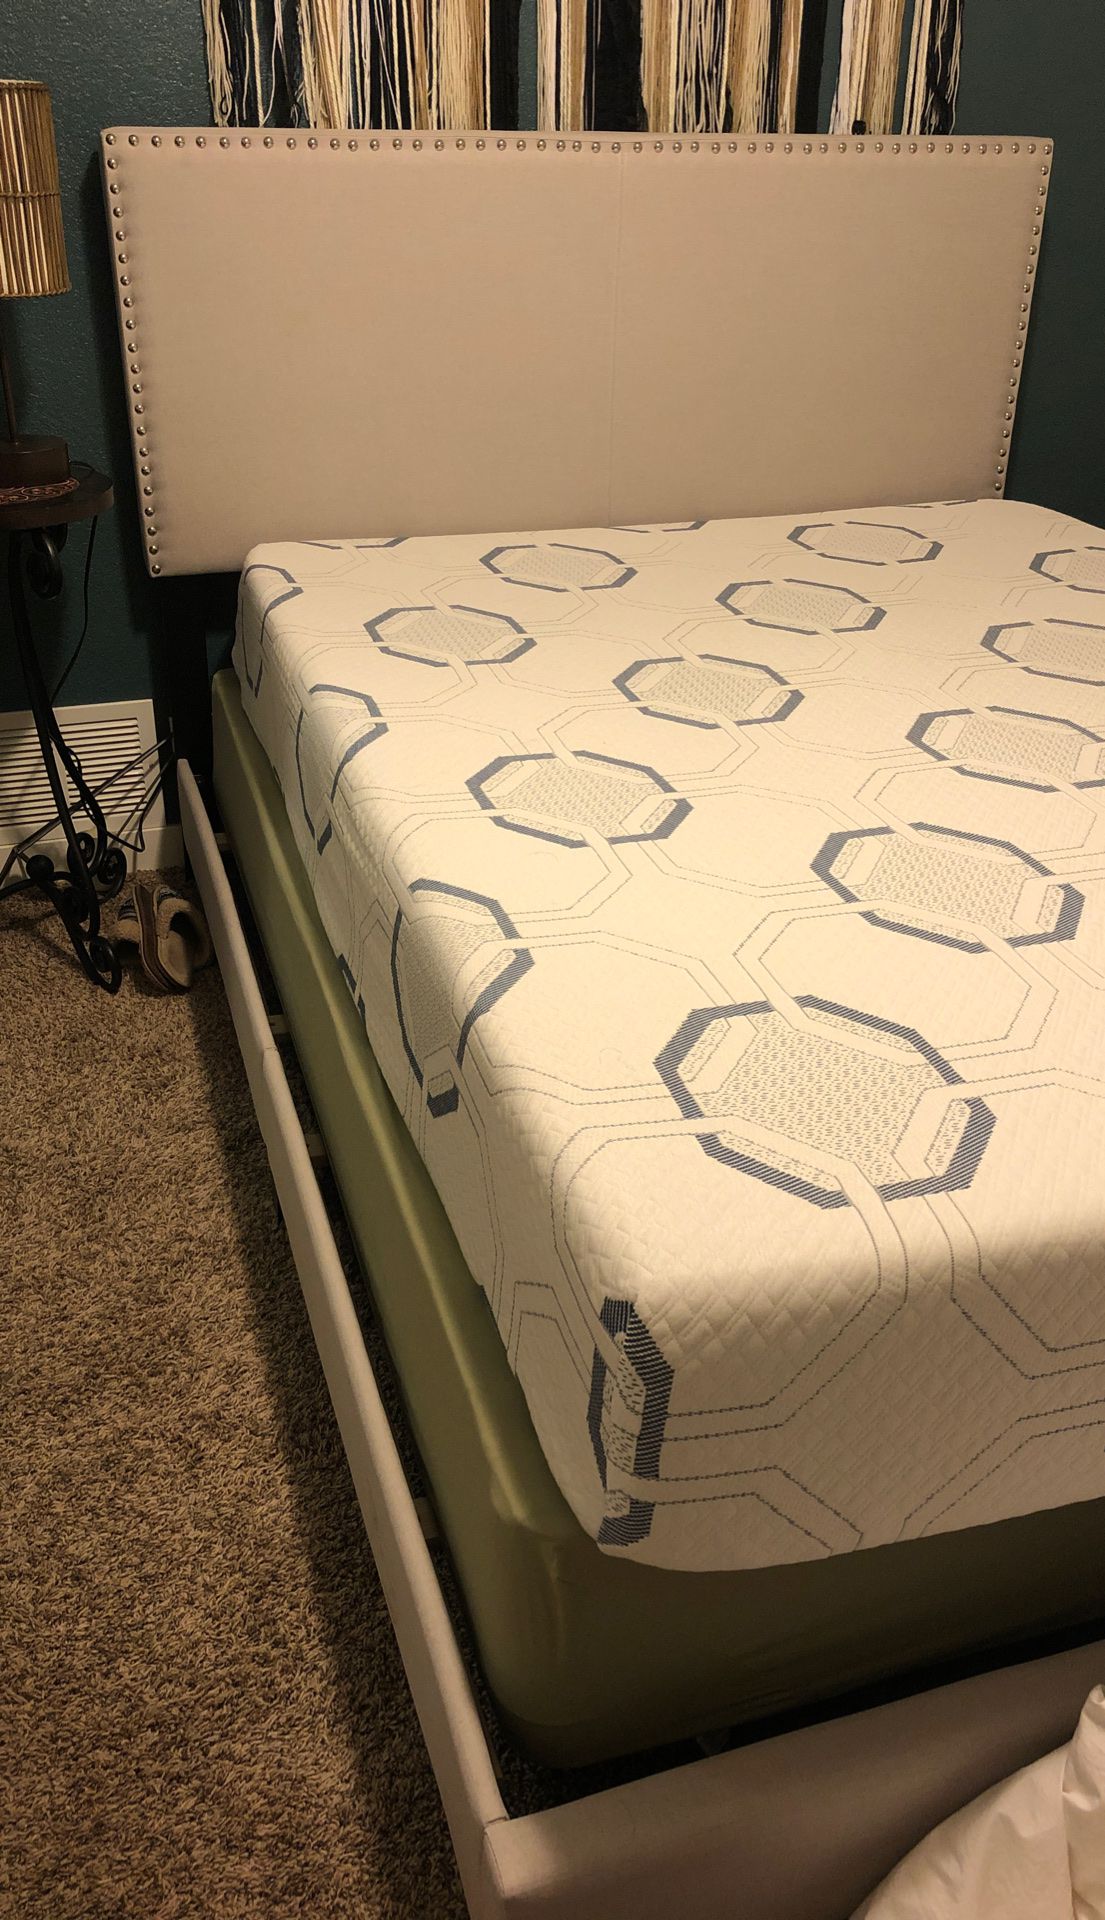 Queen bed frame, memory foam mattress, and box spring - like new